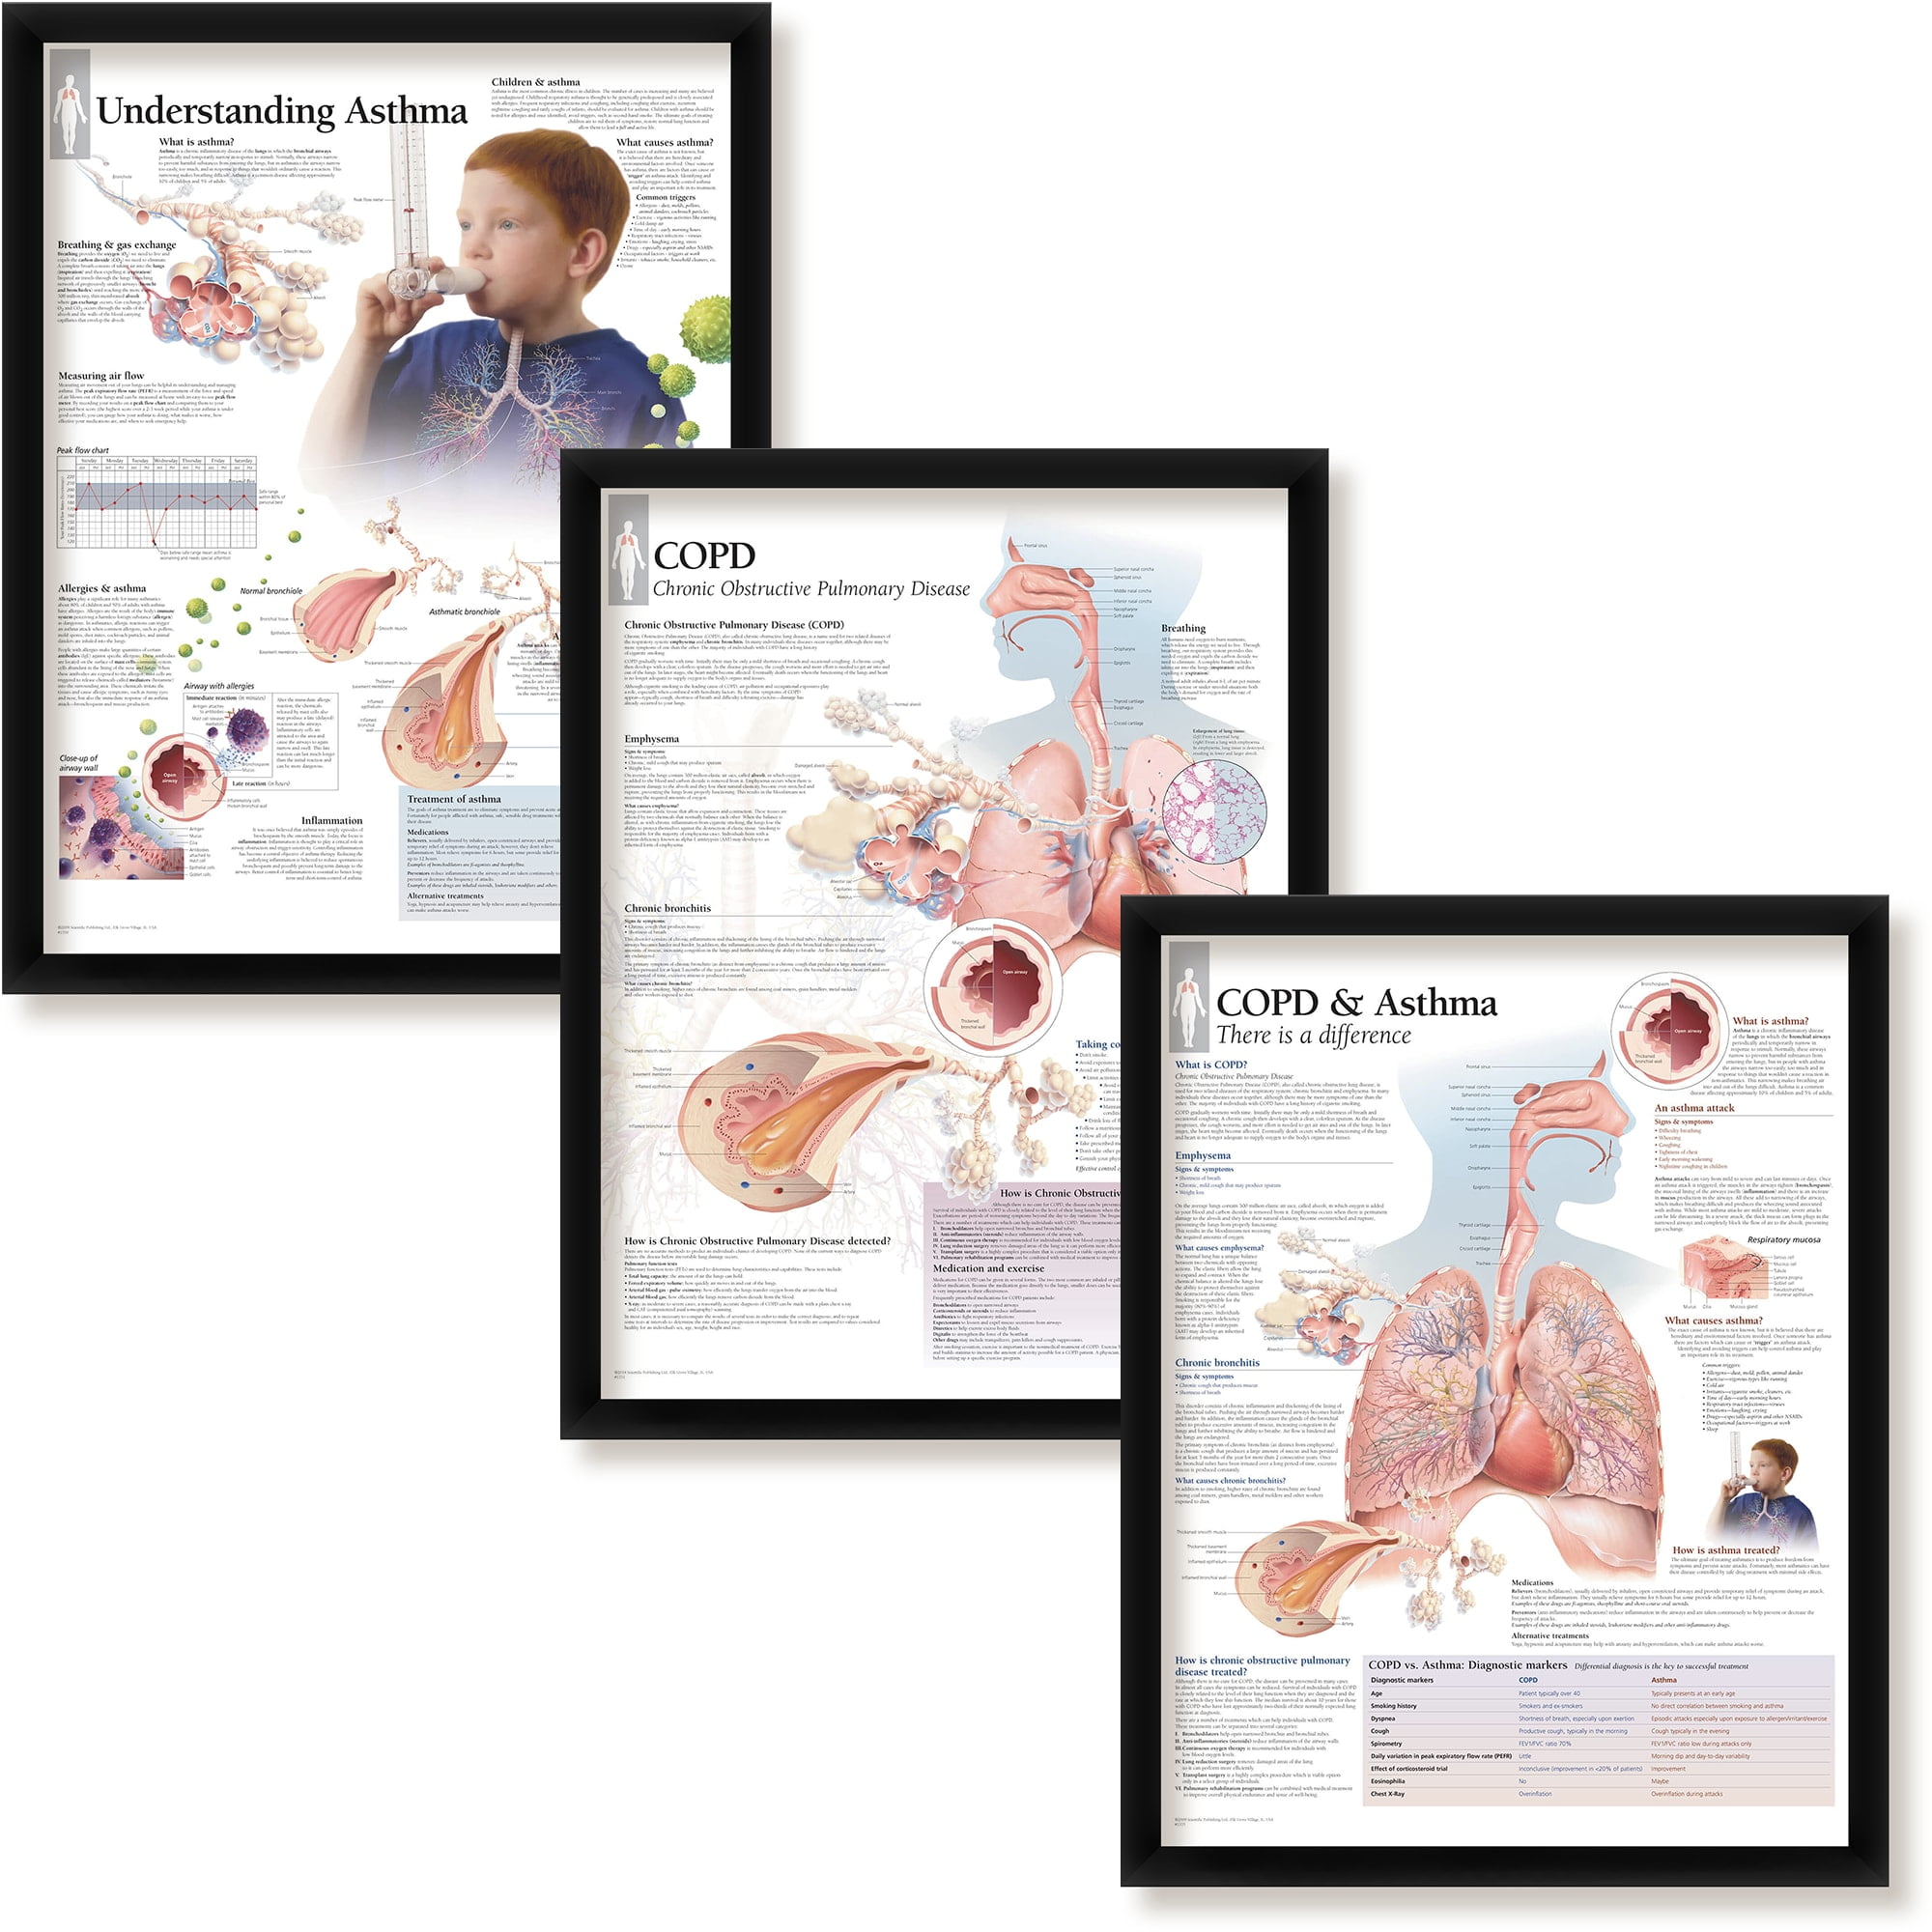 Set Of 3 Framed Medical Posters Understanding Asthma COPD And COPD